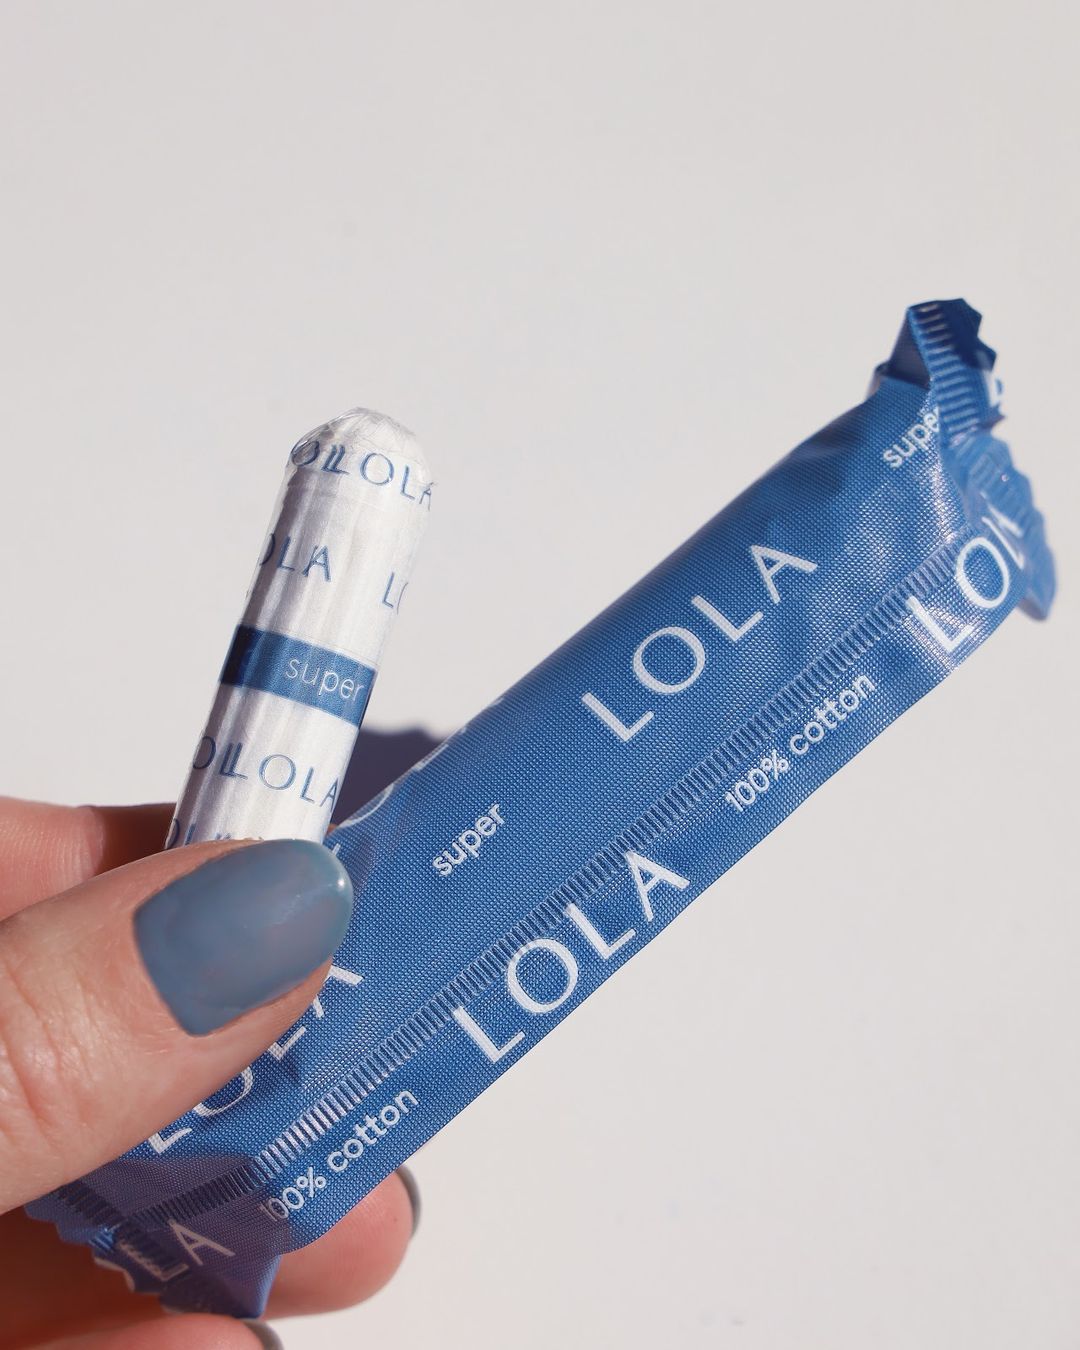 Person holding tampon from Lola